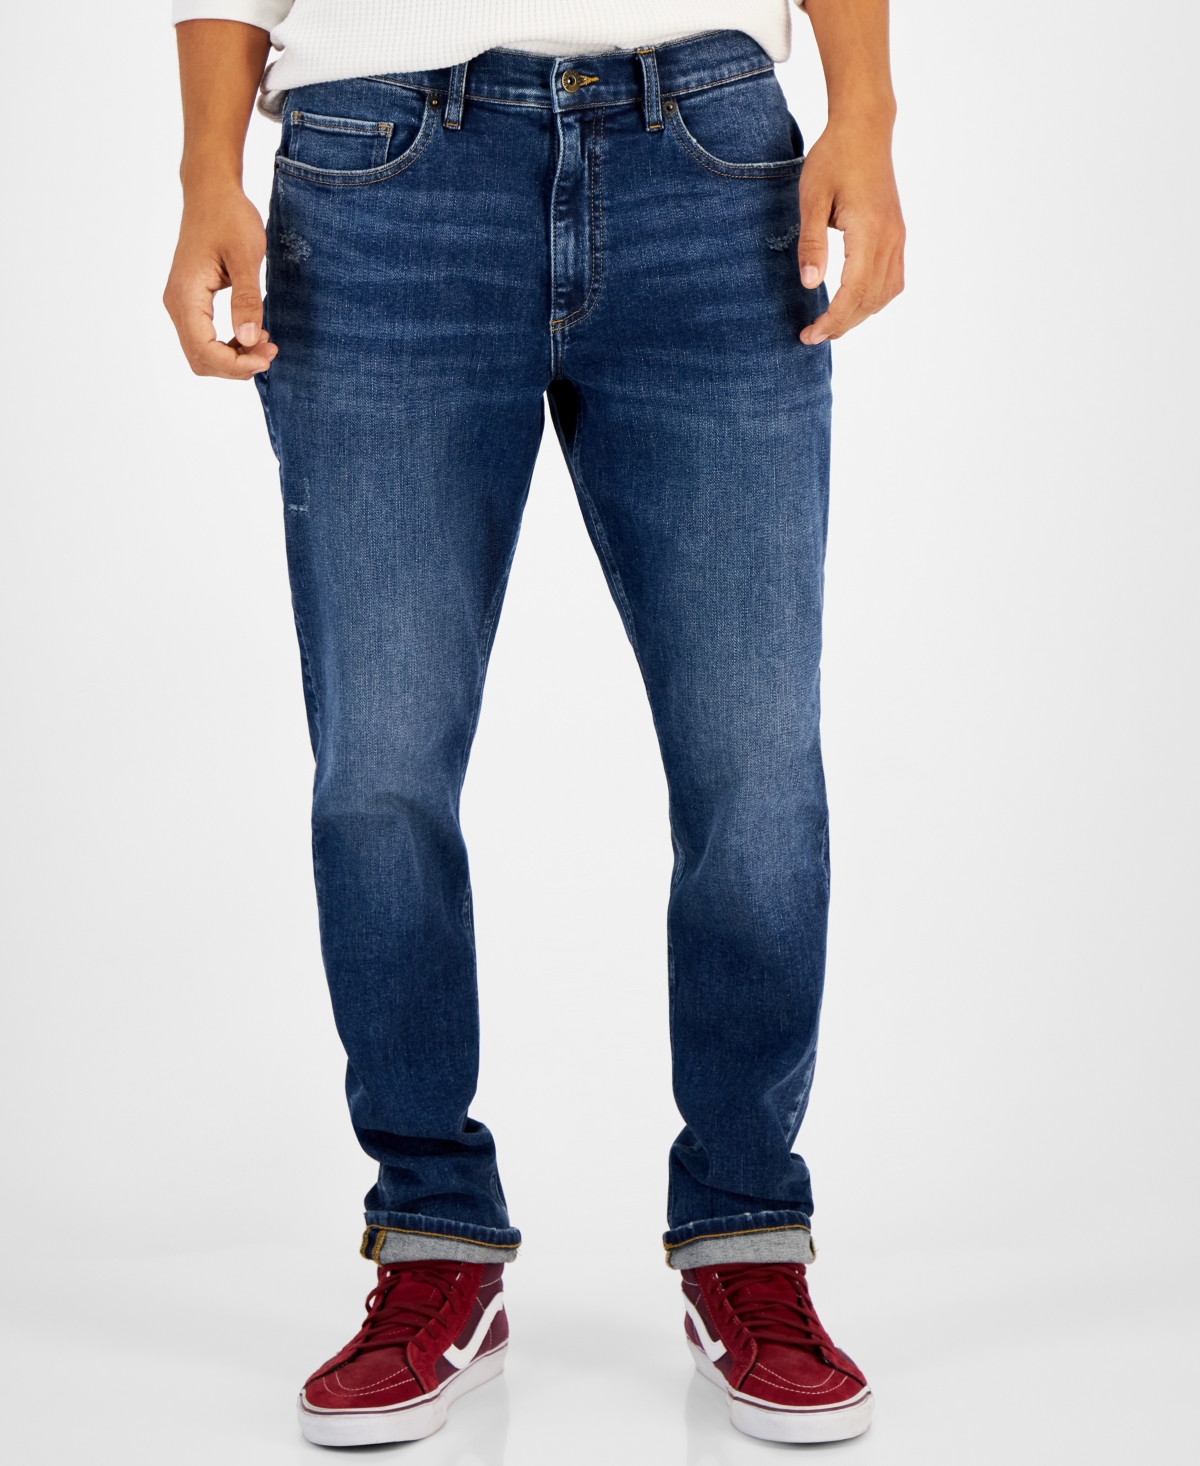 Men's Athletic Slim-Fit Jeans, Created for Macy's - Highway Dark Wash